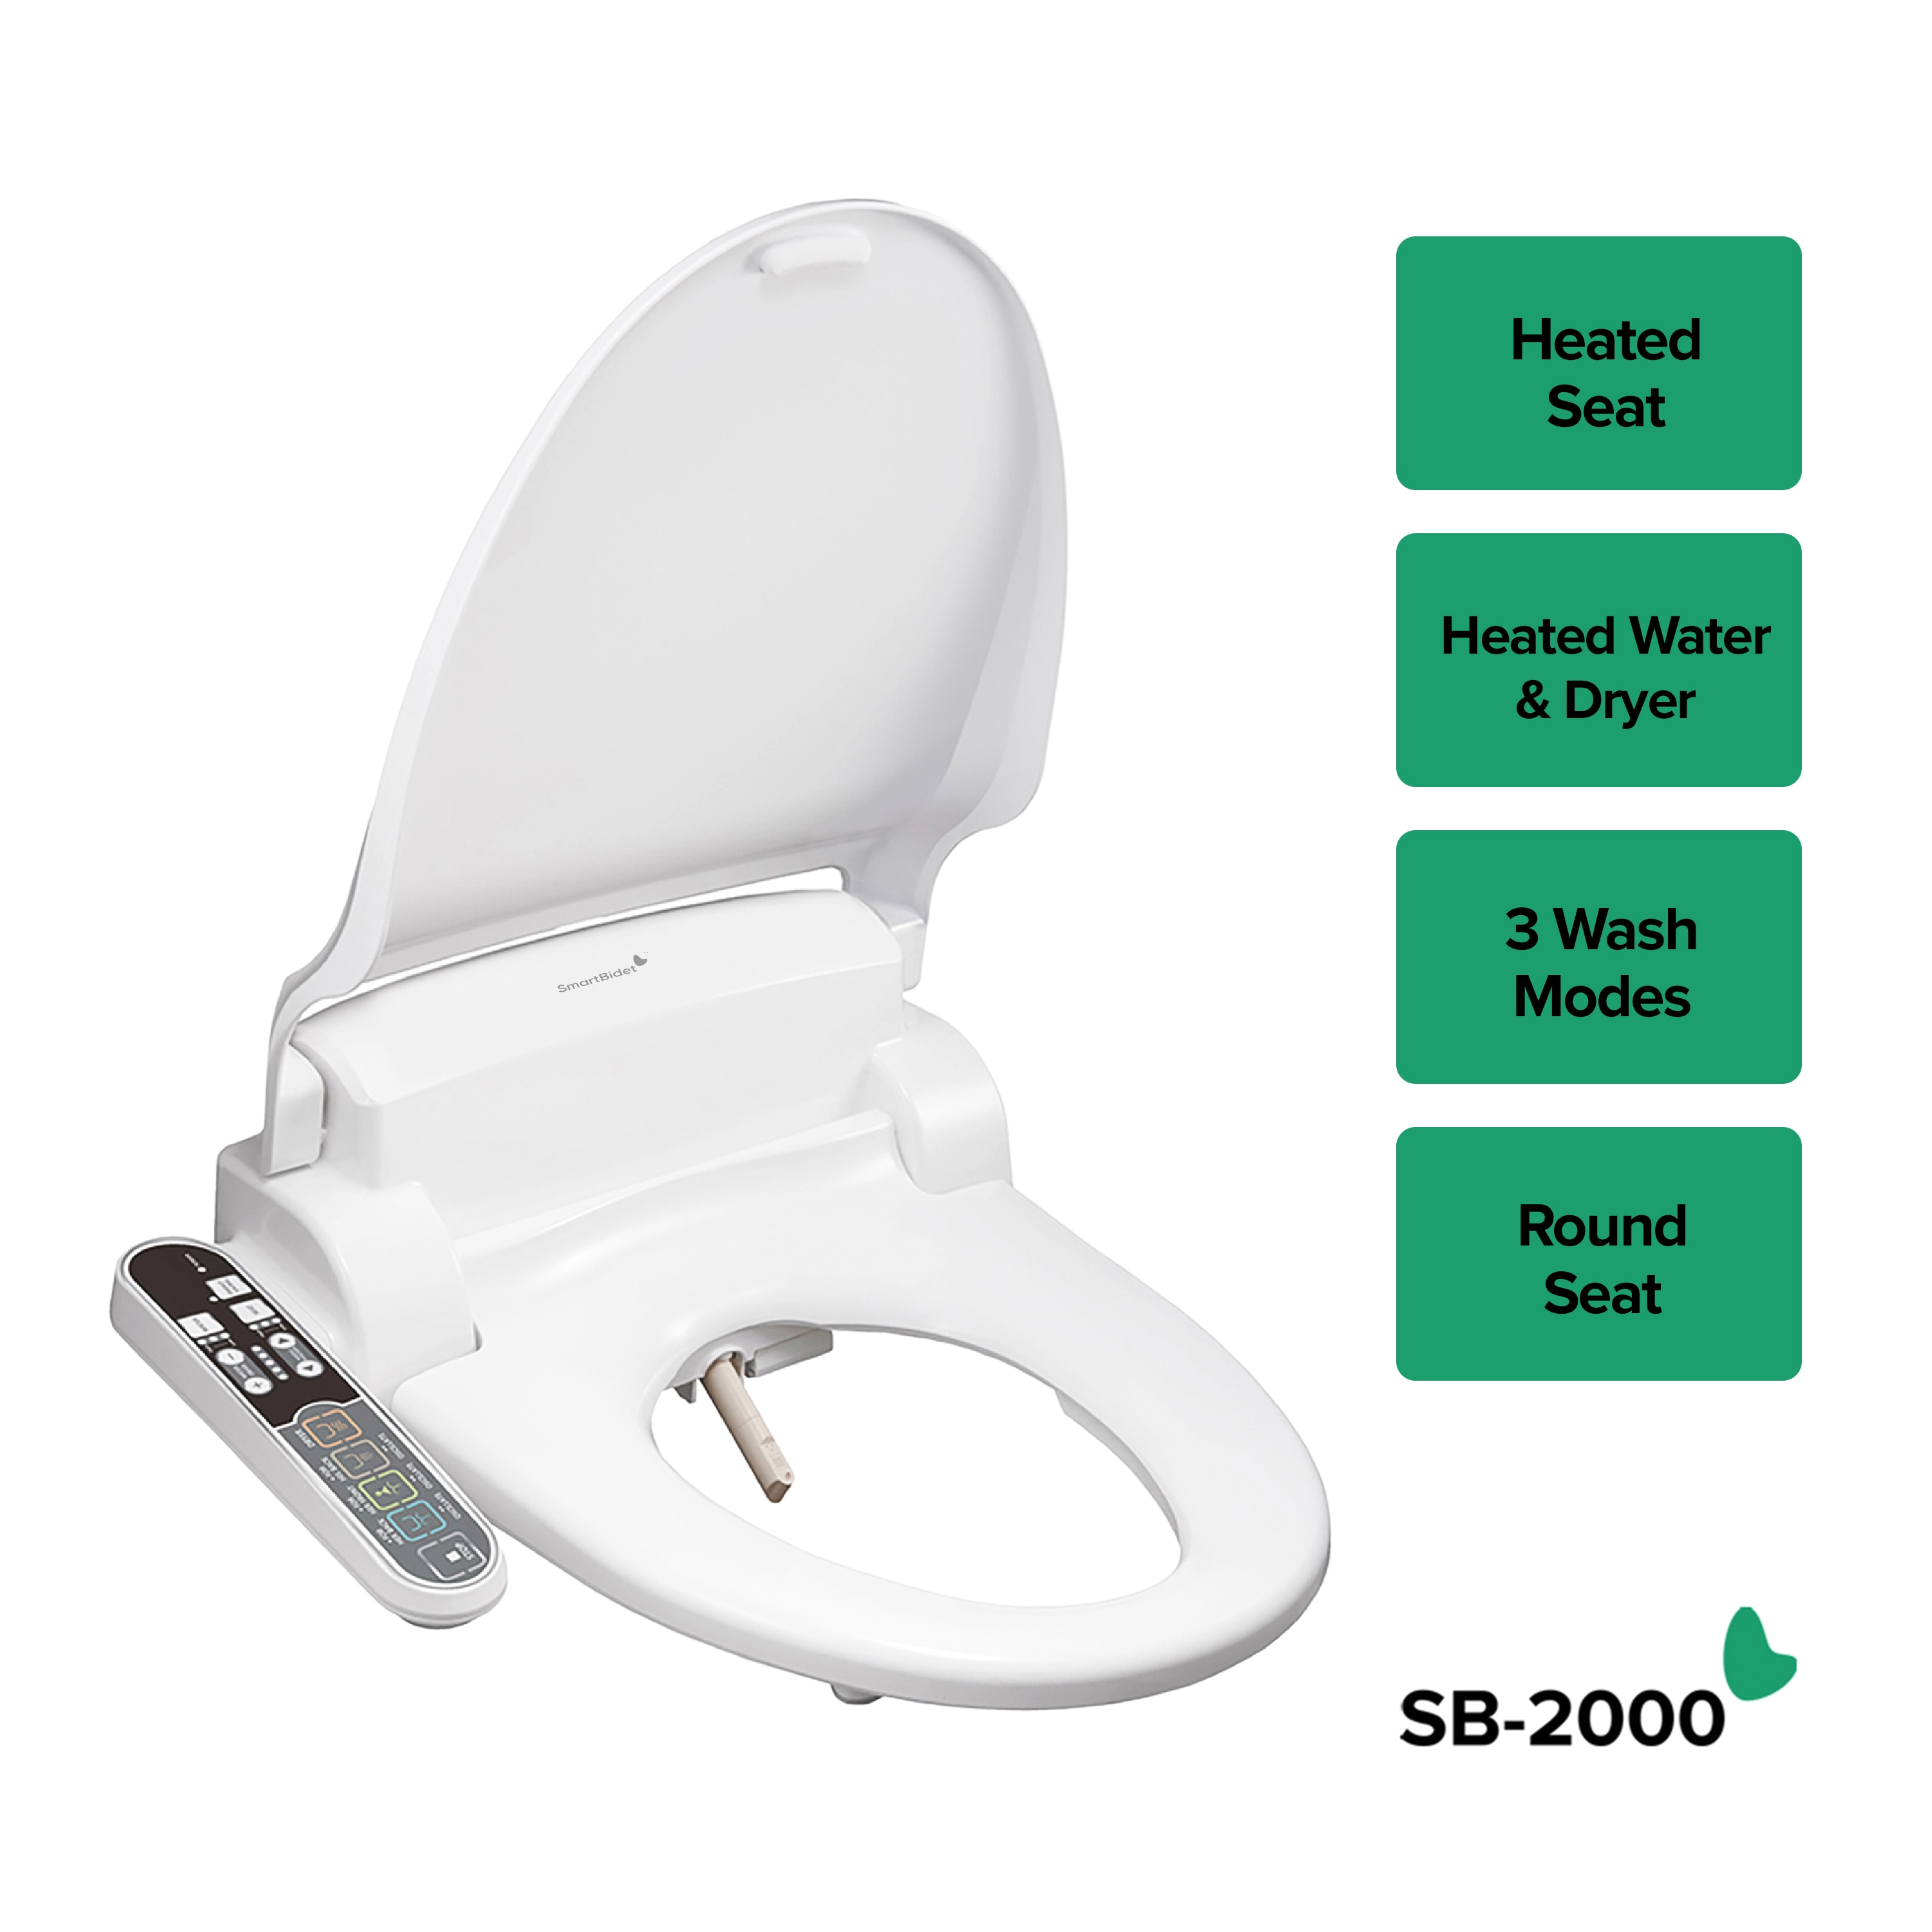 SmartBidet Plastic White Round Soft Close Heated Bidet Toilet Seat in the Toilet department Lowes.com